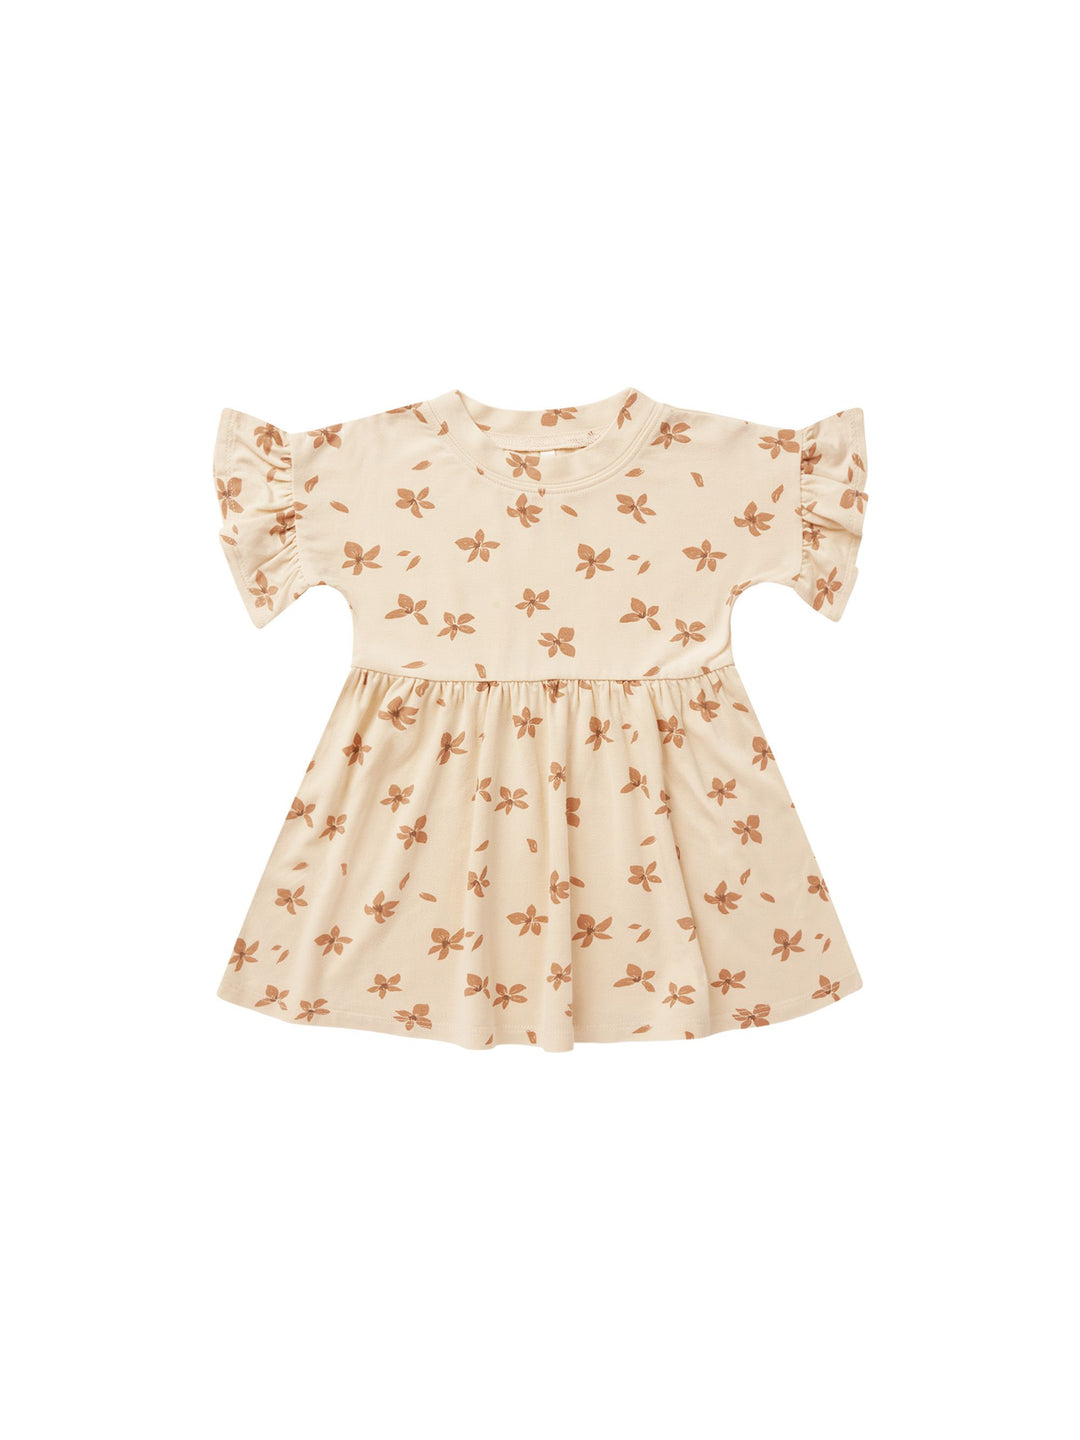 Scatter Babydoll Dress by Rylee and Cru